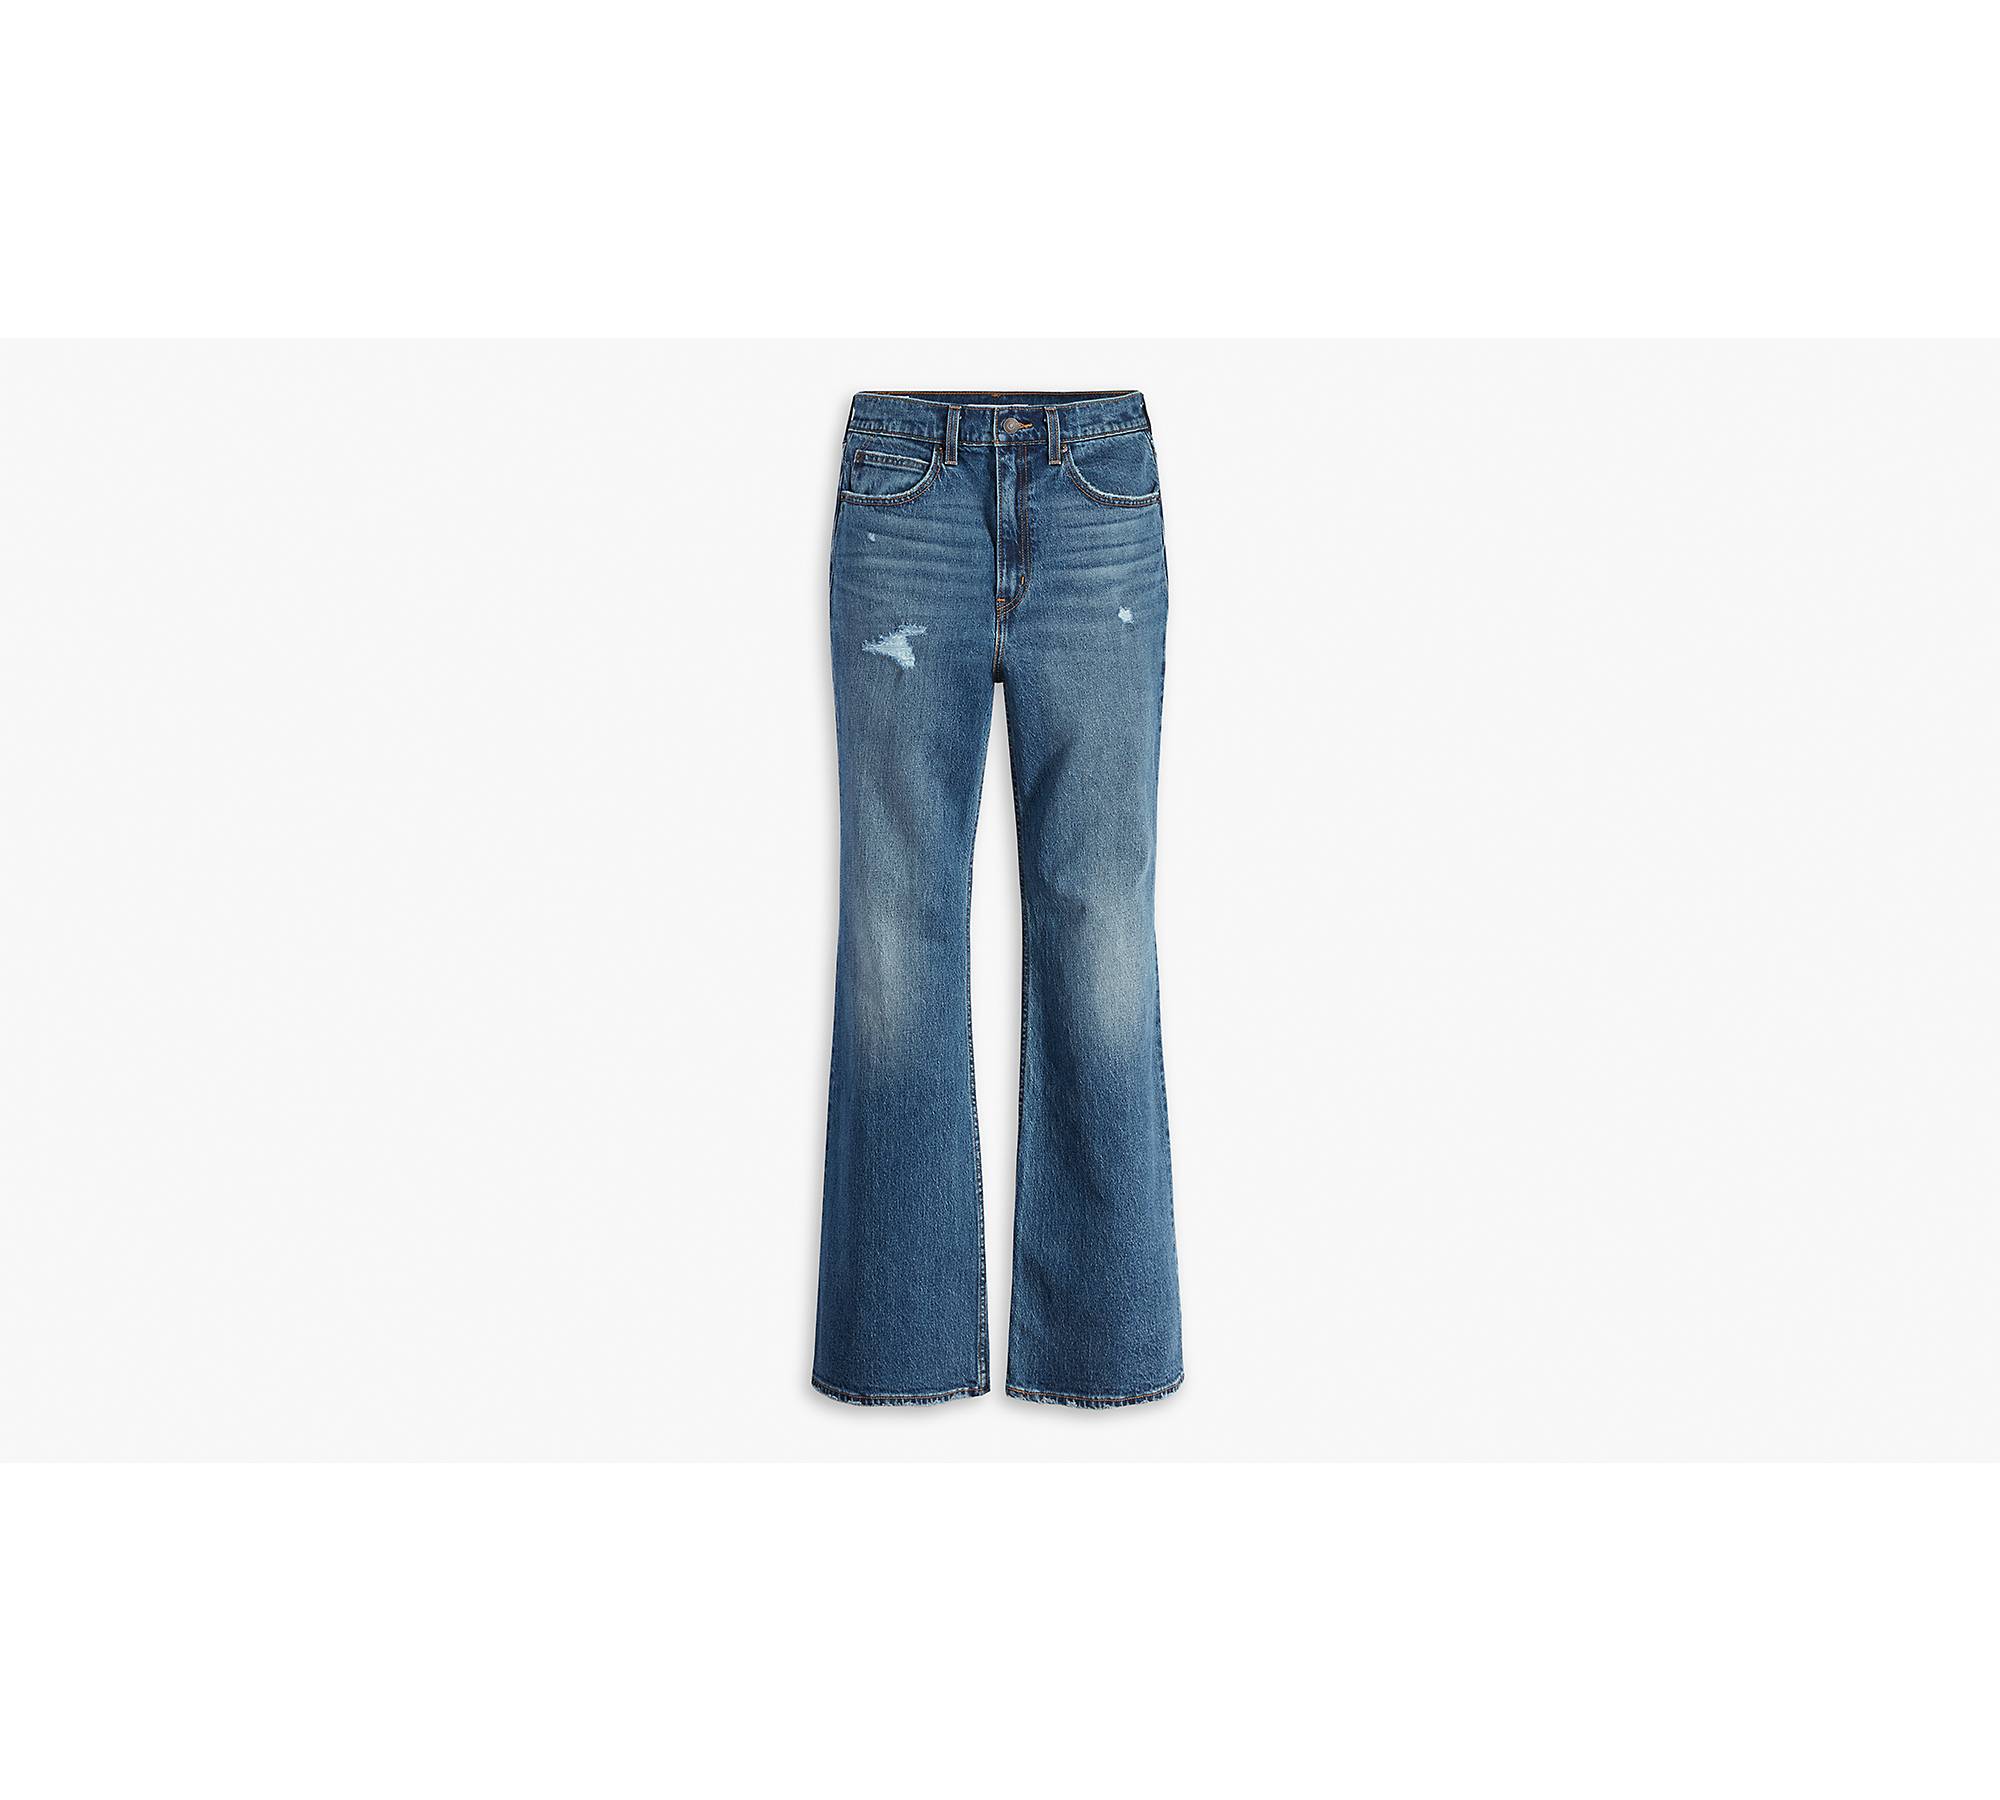 Bell Bottom Jeans for Women Classic Skinny Flared Jean Pants at   Women's Jeans store